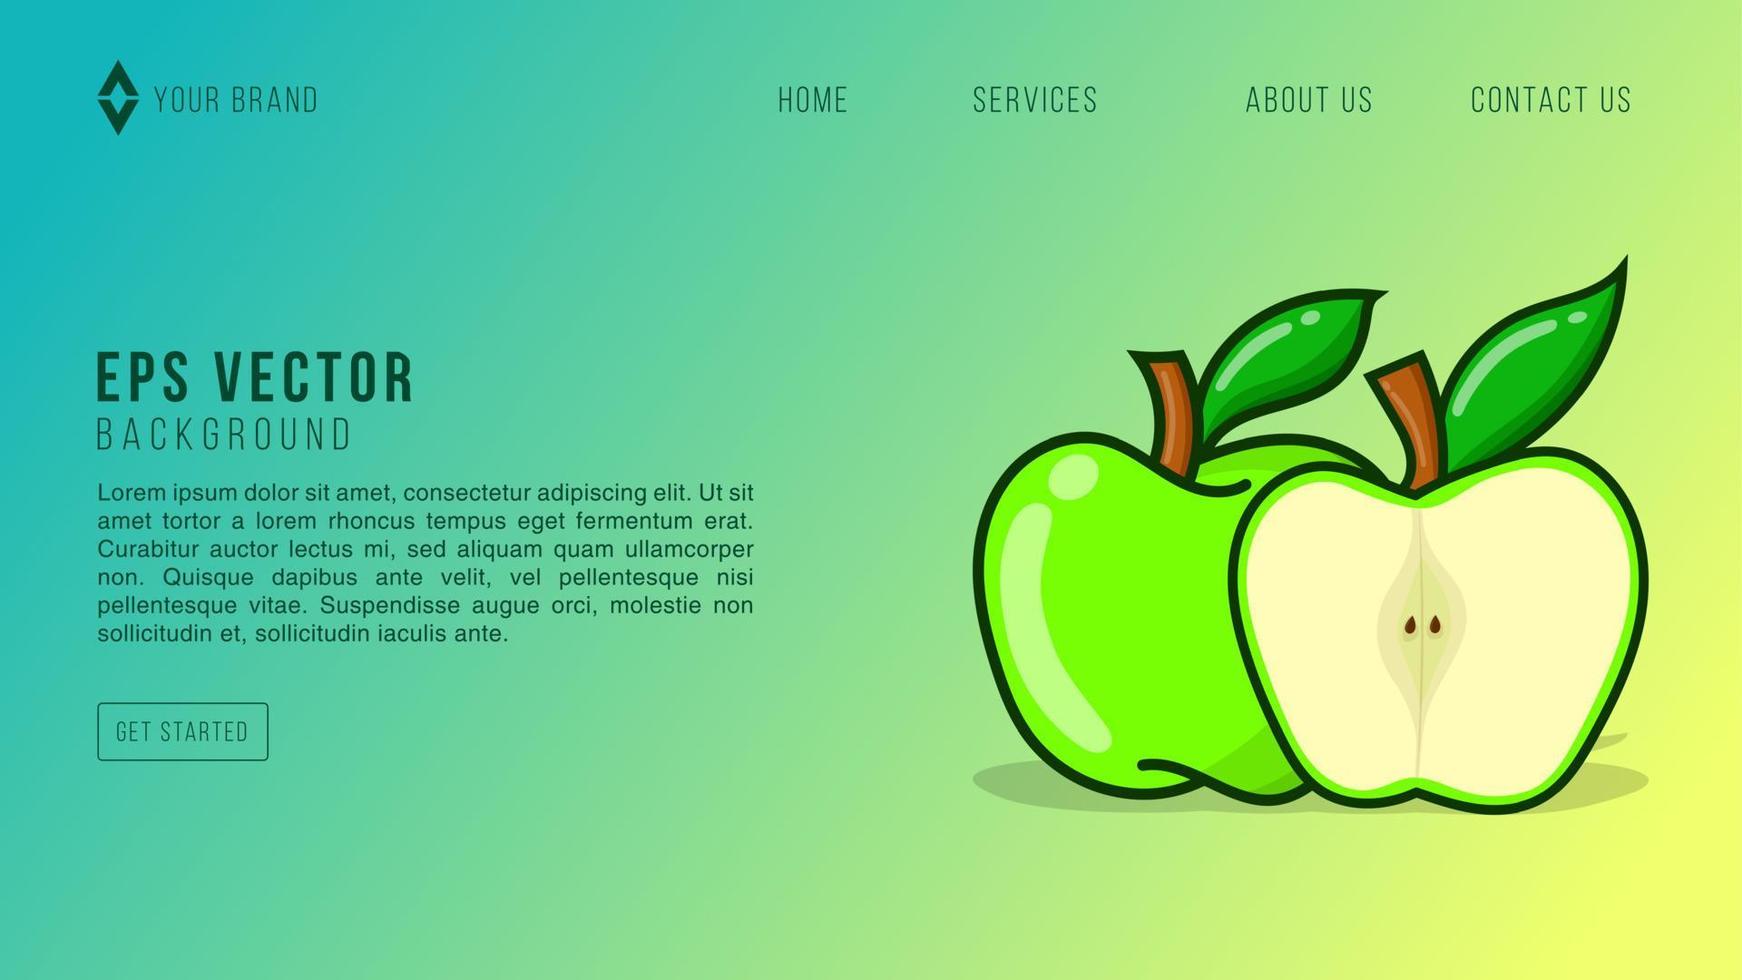 Green Apple Web Design Abstract Background Lemonade EPS 10 Vector For Website, Landing Page, Home Page, Web Page, Web Template